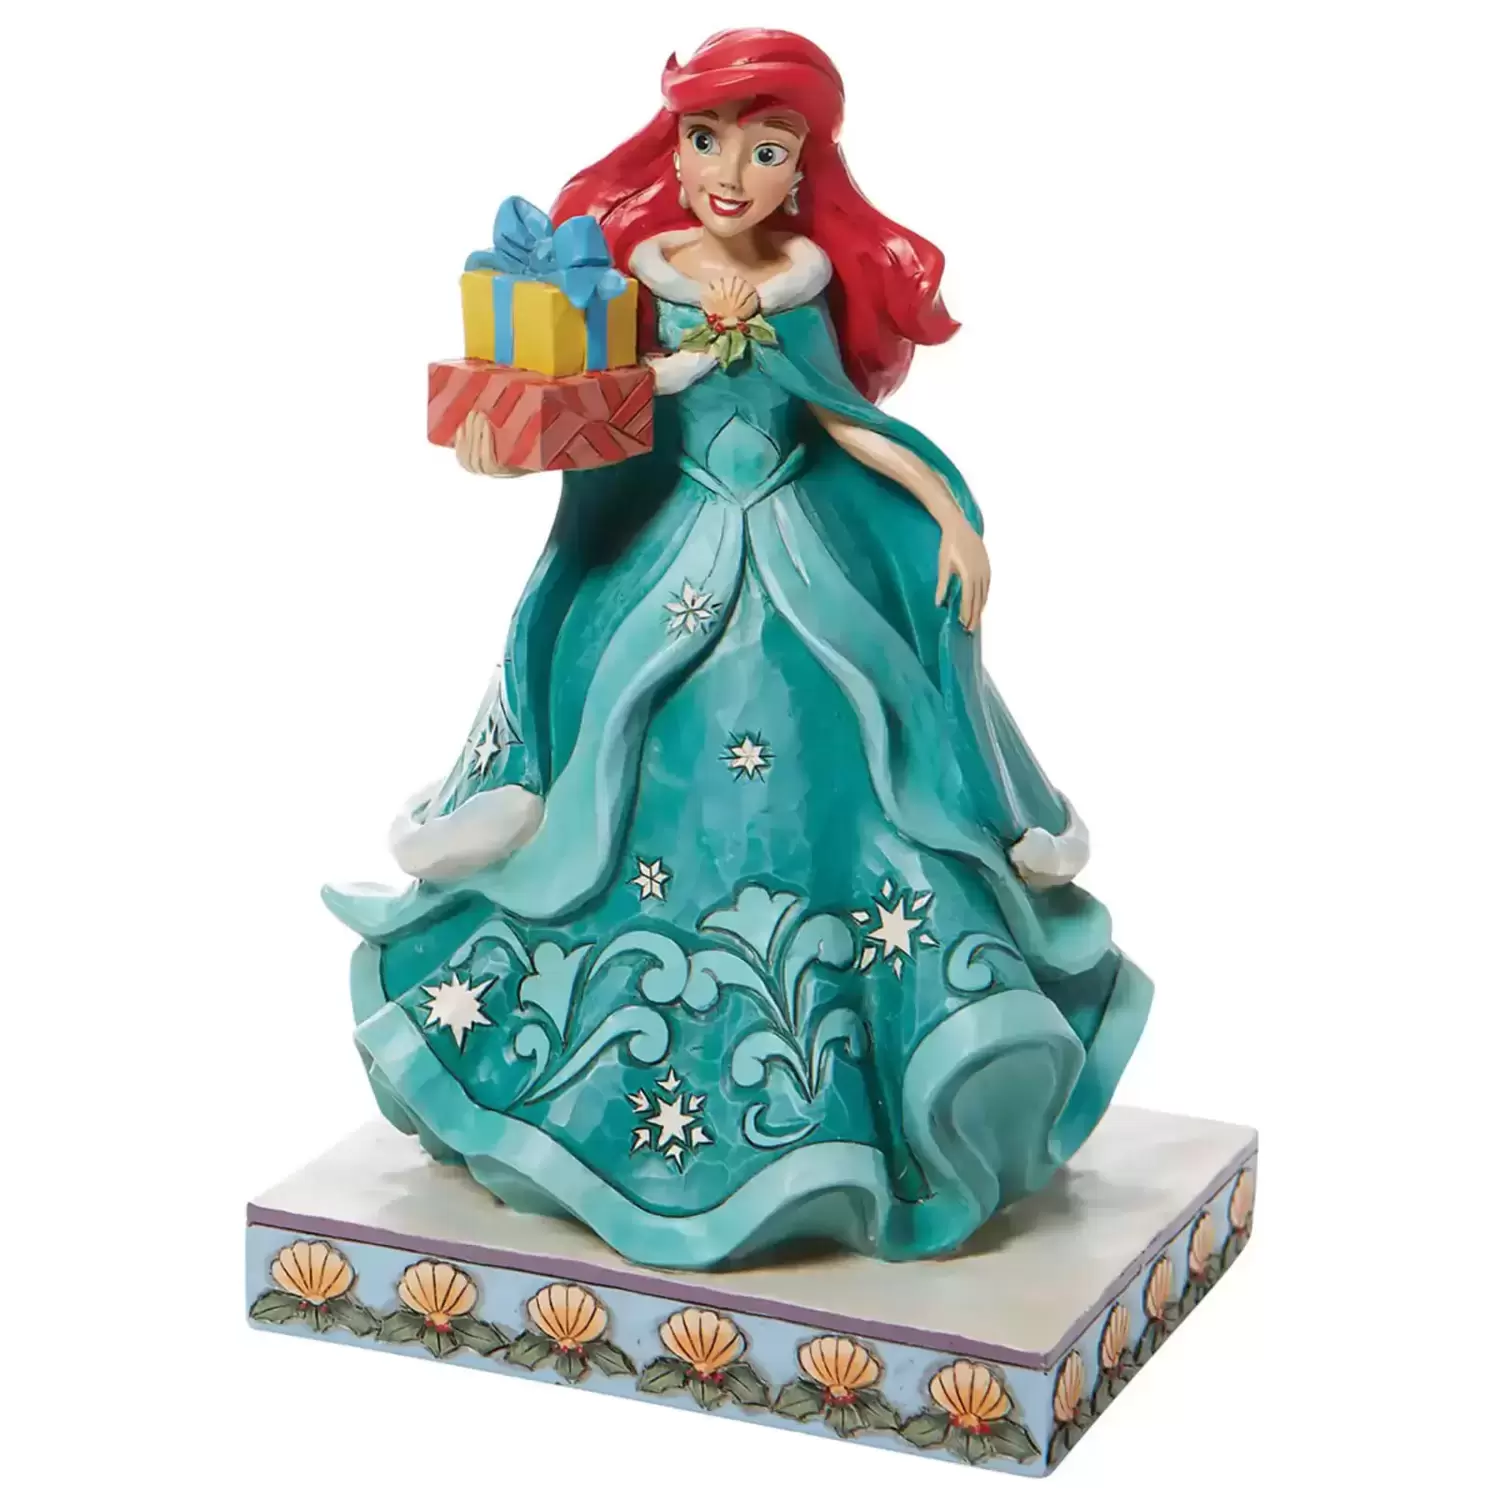 Disney Traditions by Jim Shore - Ariel with Gifts